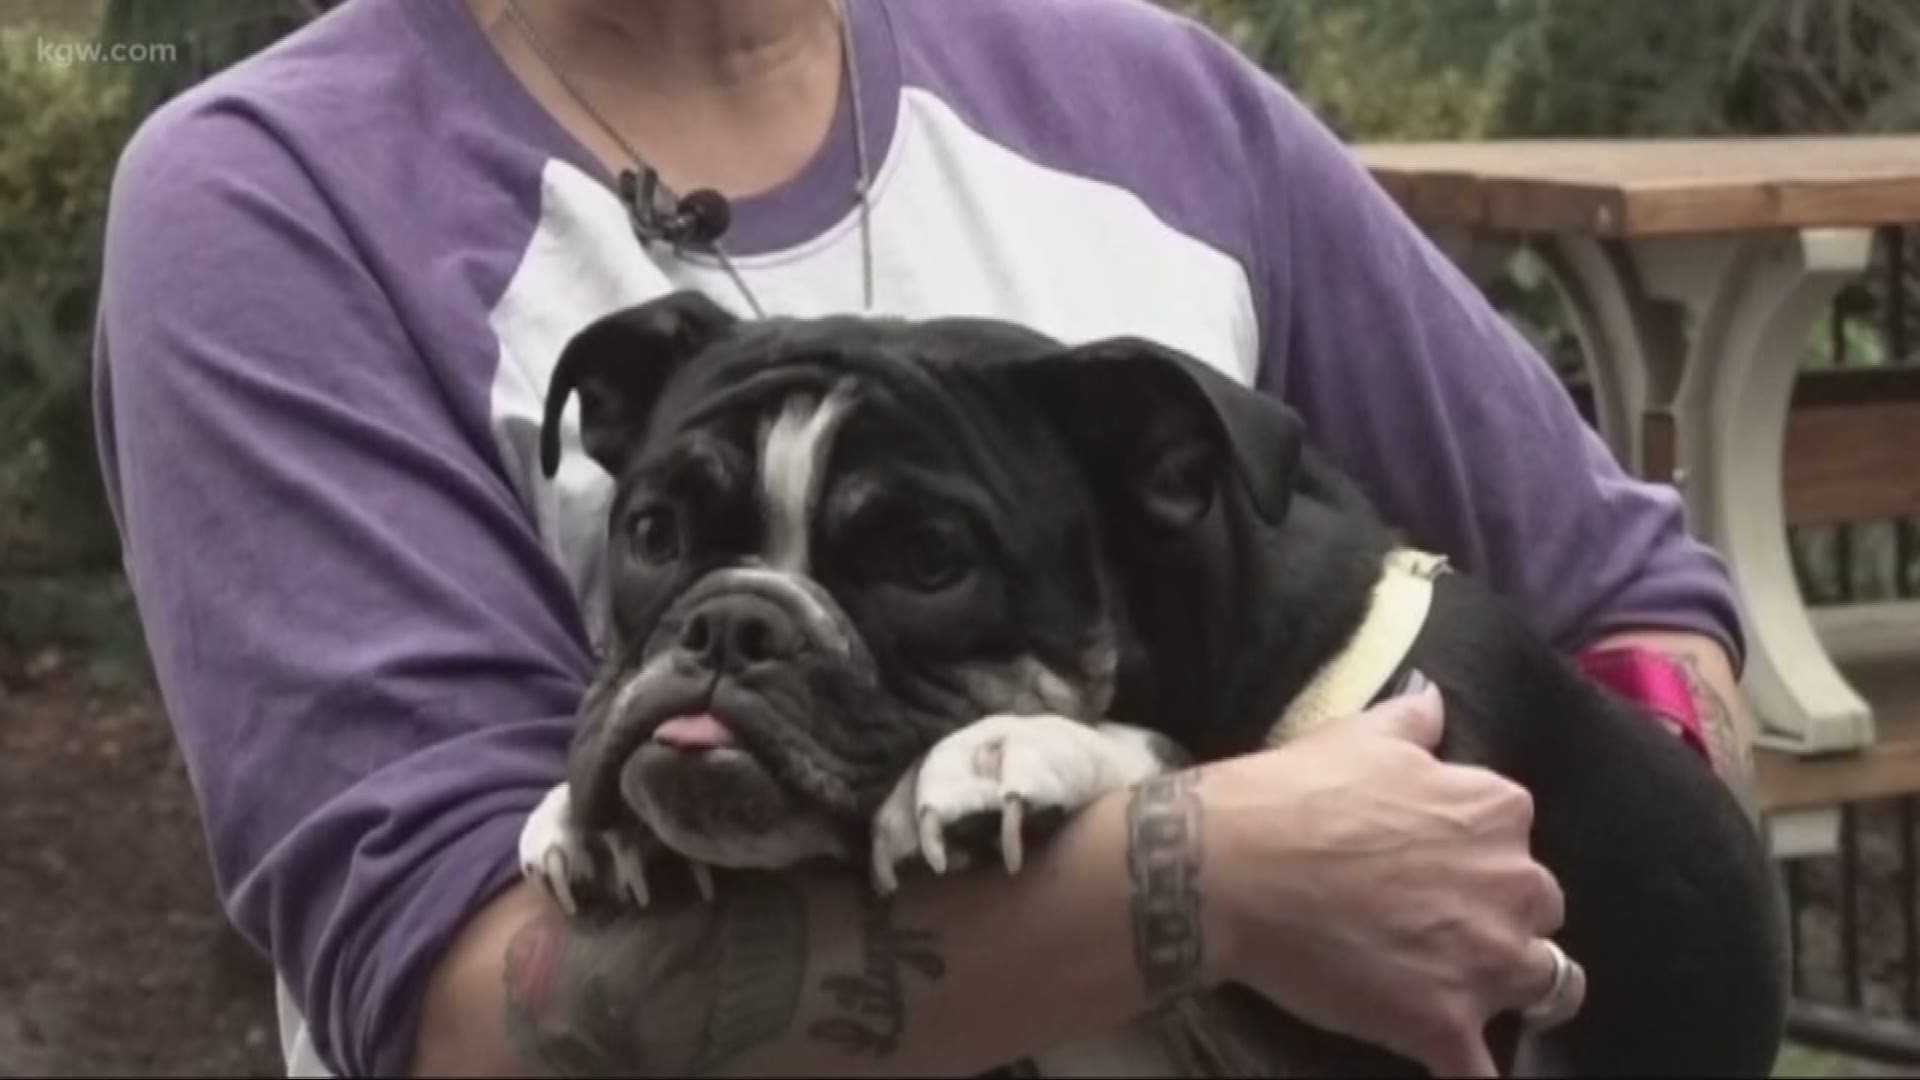 A local bulldog has a new lease on life thanks to a special prosthetic leg.